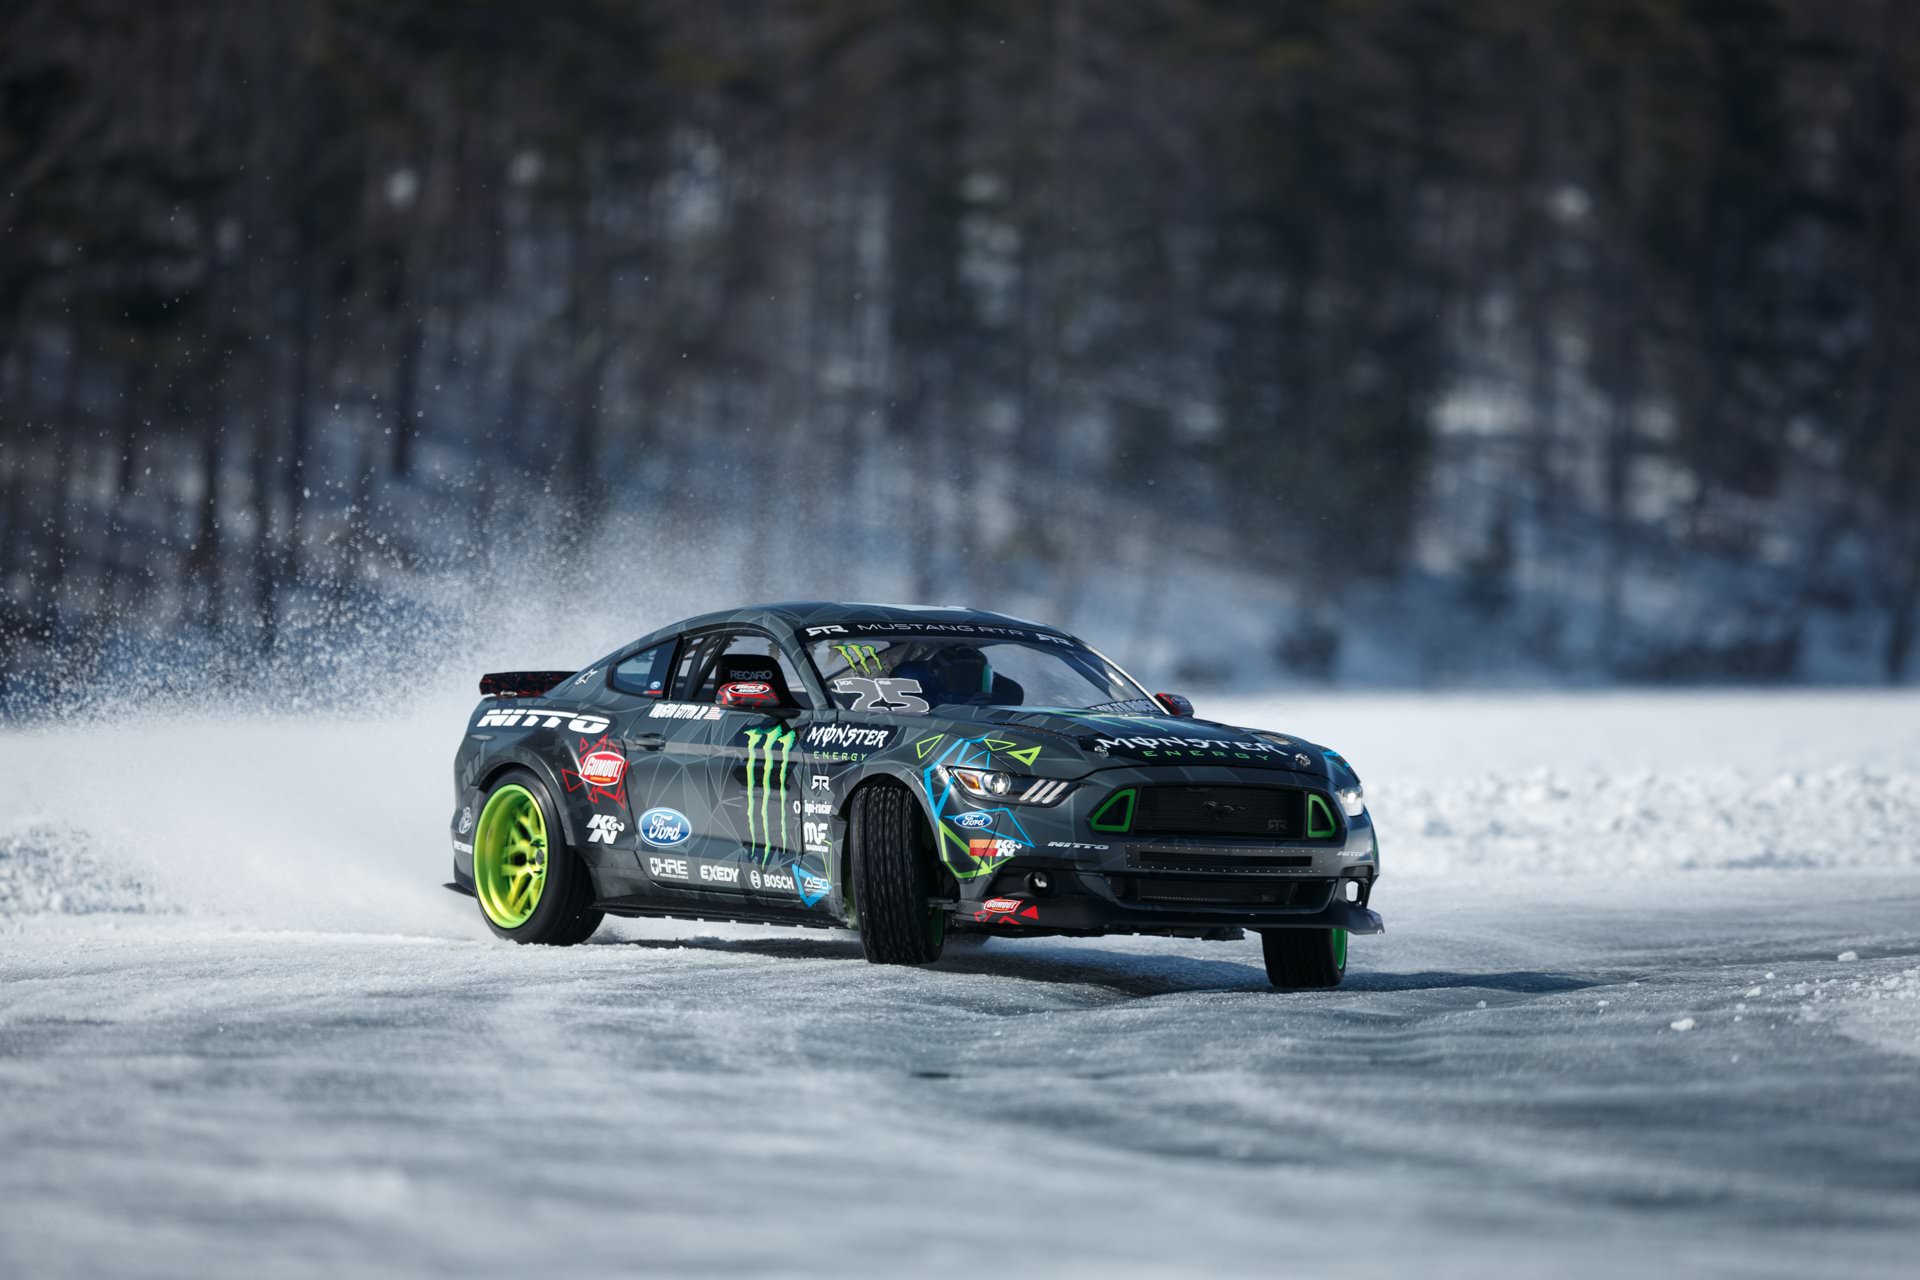 Drift windows. Ford Mustang RTR Monster Energy 2015 дрифт. Ford Mustang RTR. Форд Мустанг дрифт. Ford Mustang RTR 2015.